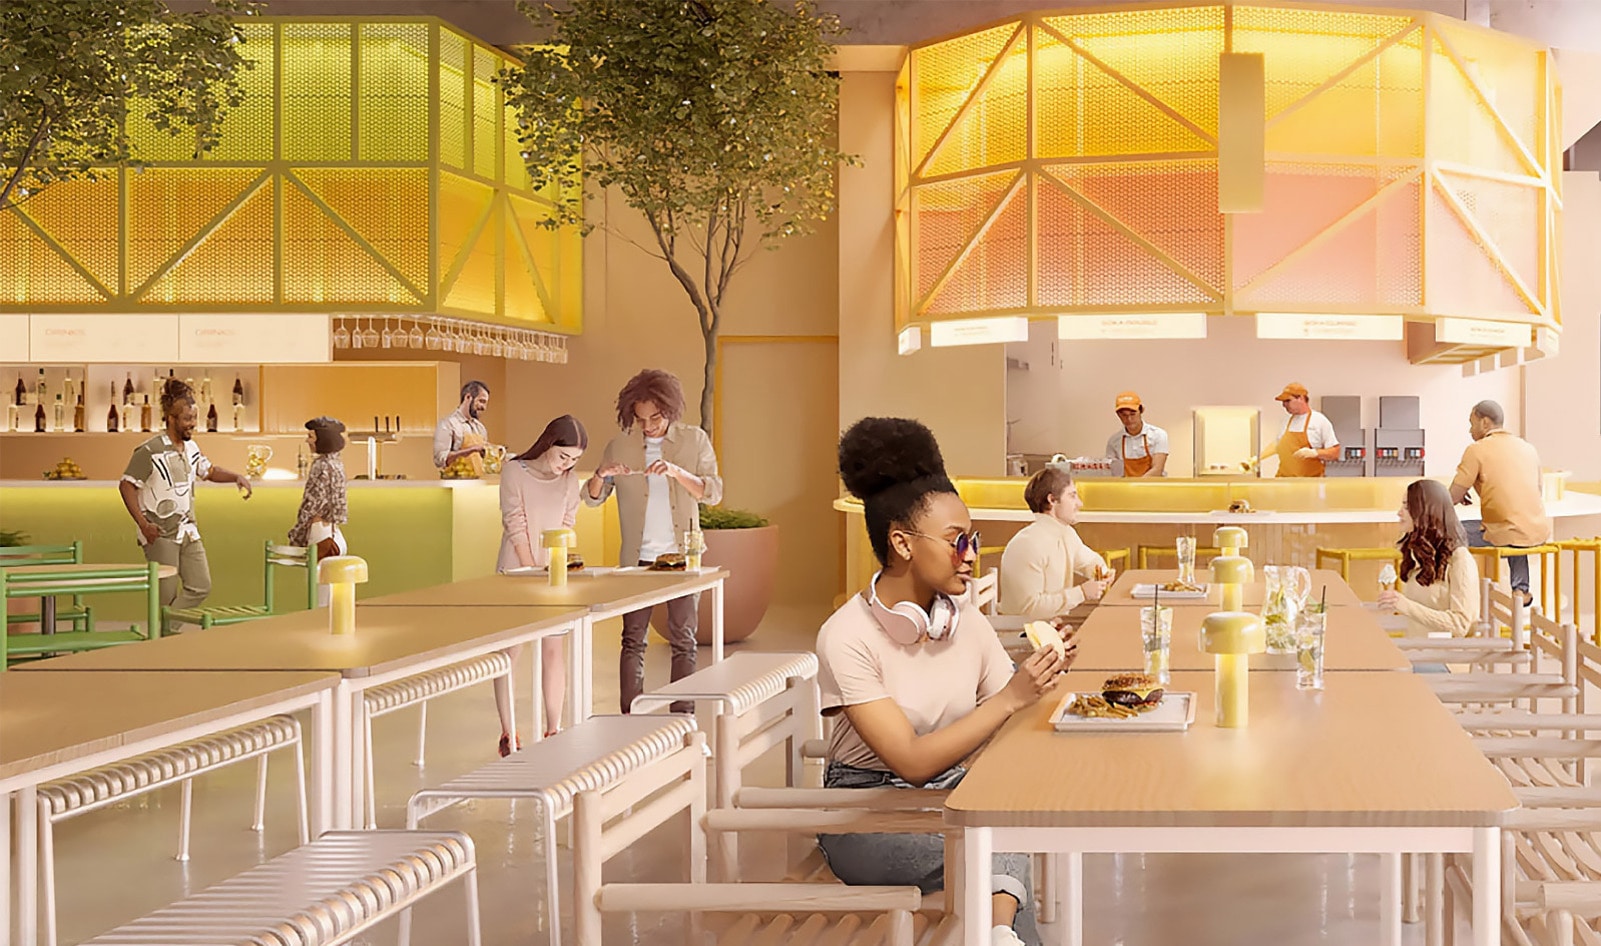 IKEA’s New Plant-Based Food Hall Is Coming to These 3 Cities